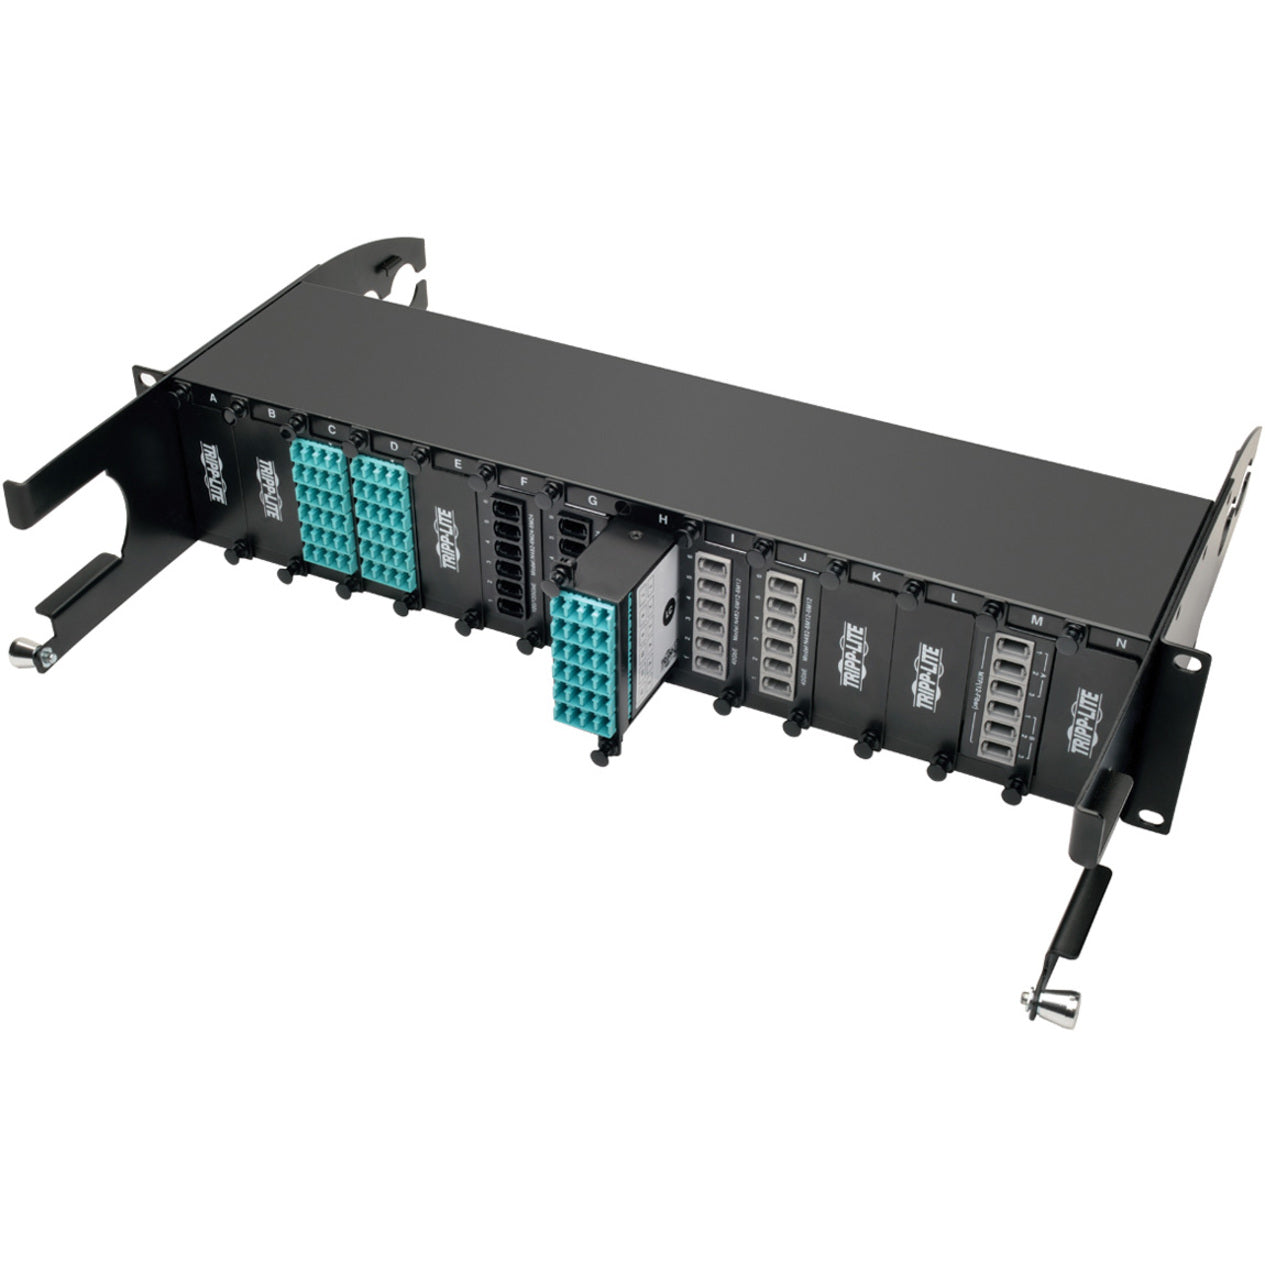 Tripp Lite N482-1M24-LC12 100Gb/120Gb to 10Gb Breakout Cassette - 24-Fiber MTP/MPO to (x12) LC, Network Patch Panel